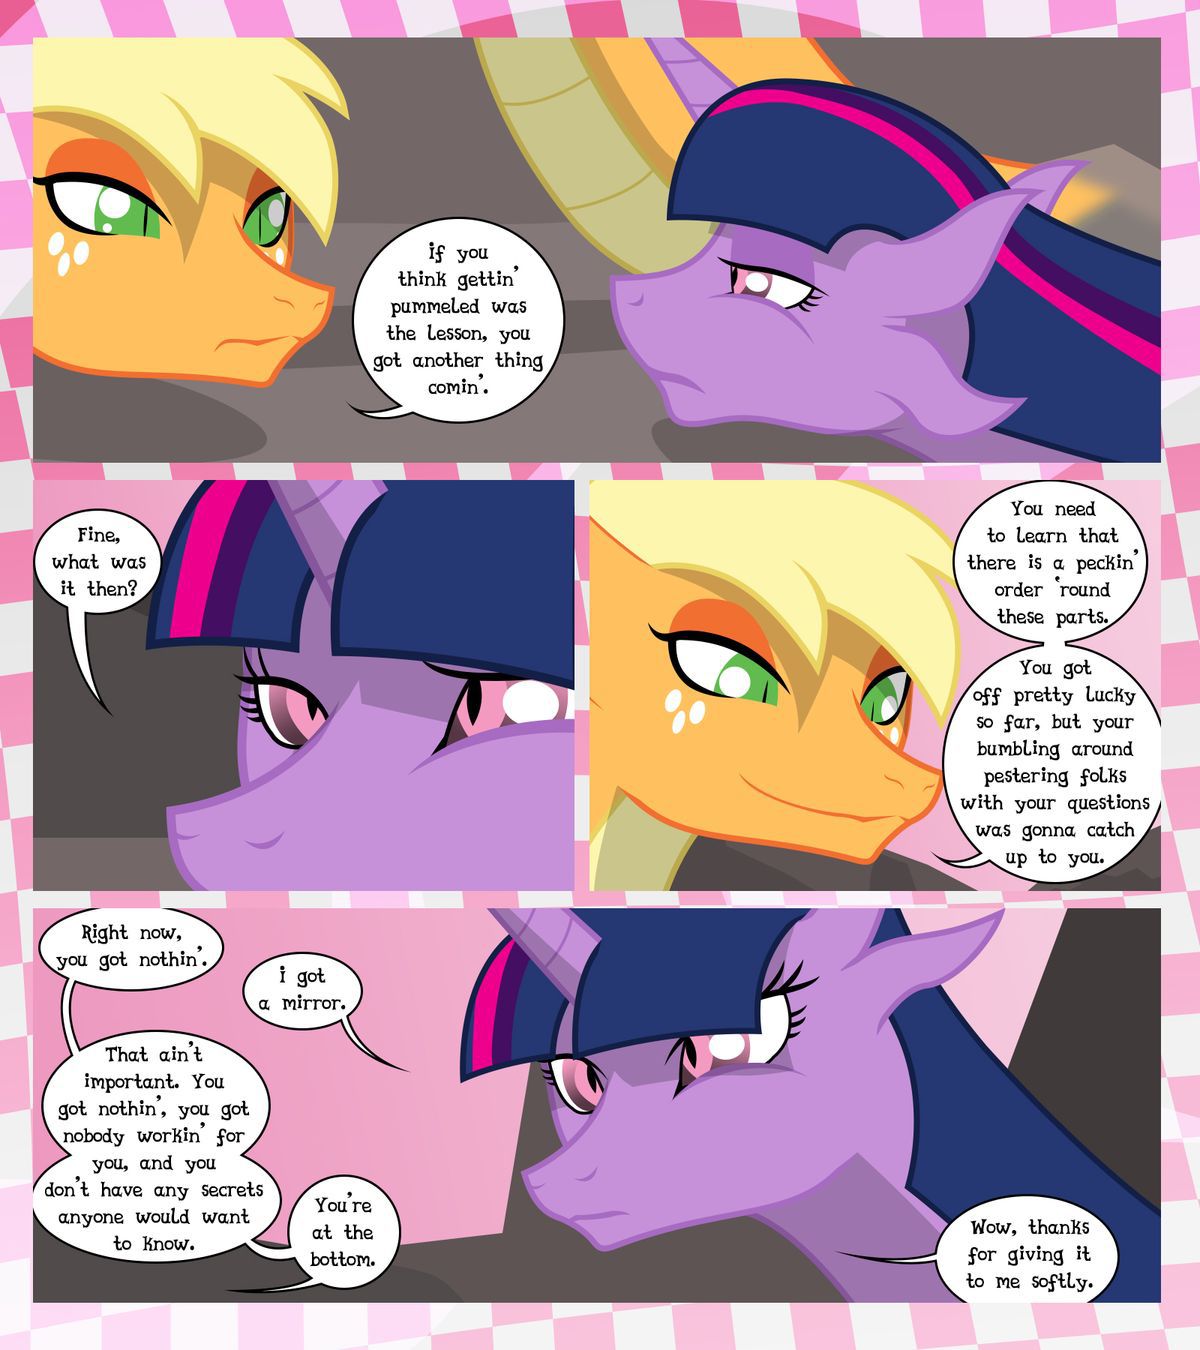 [GatesMcCloud] Cutie Mark Crusaders 10k: Chapter 3 - The Lost (My Little Pony: Friendship is Magic) [English] [Ongoing] 61